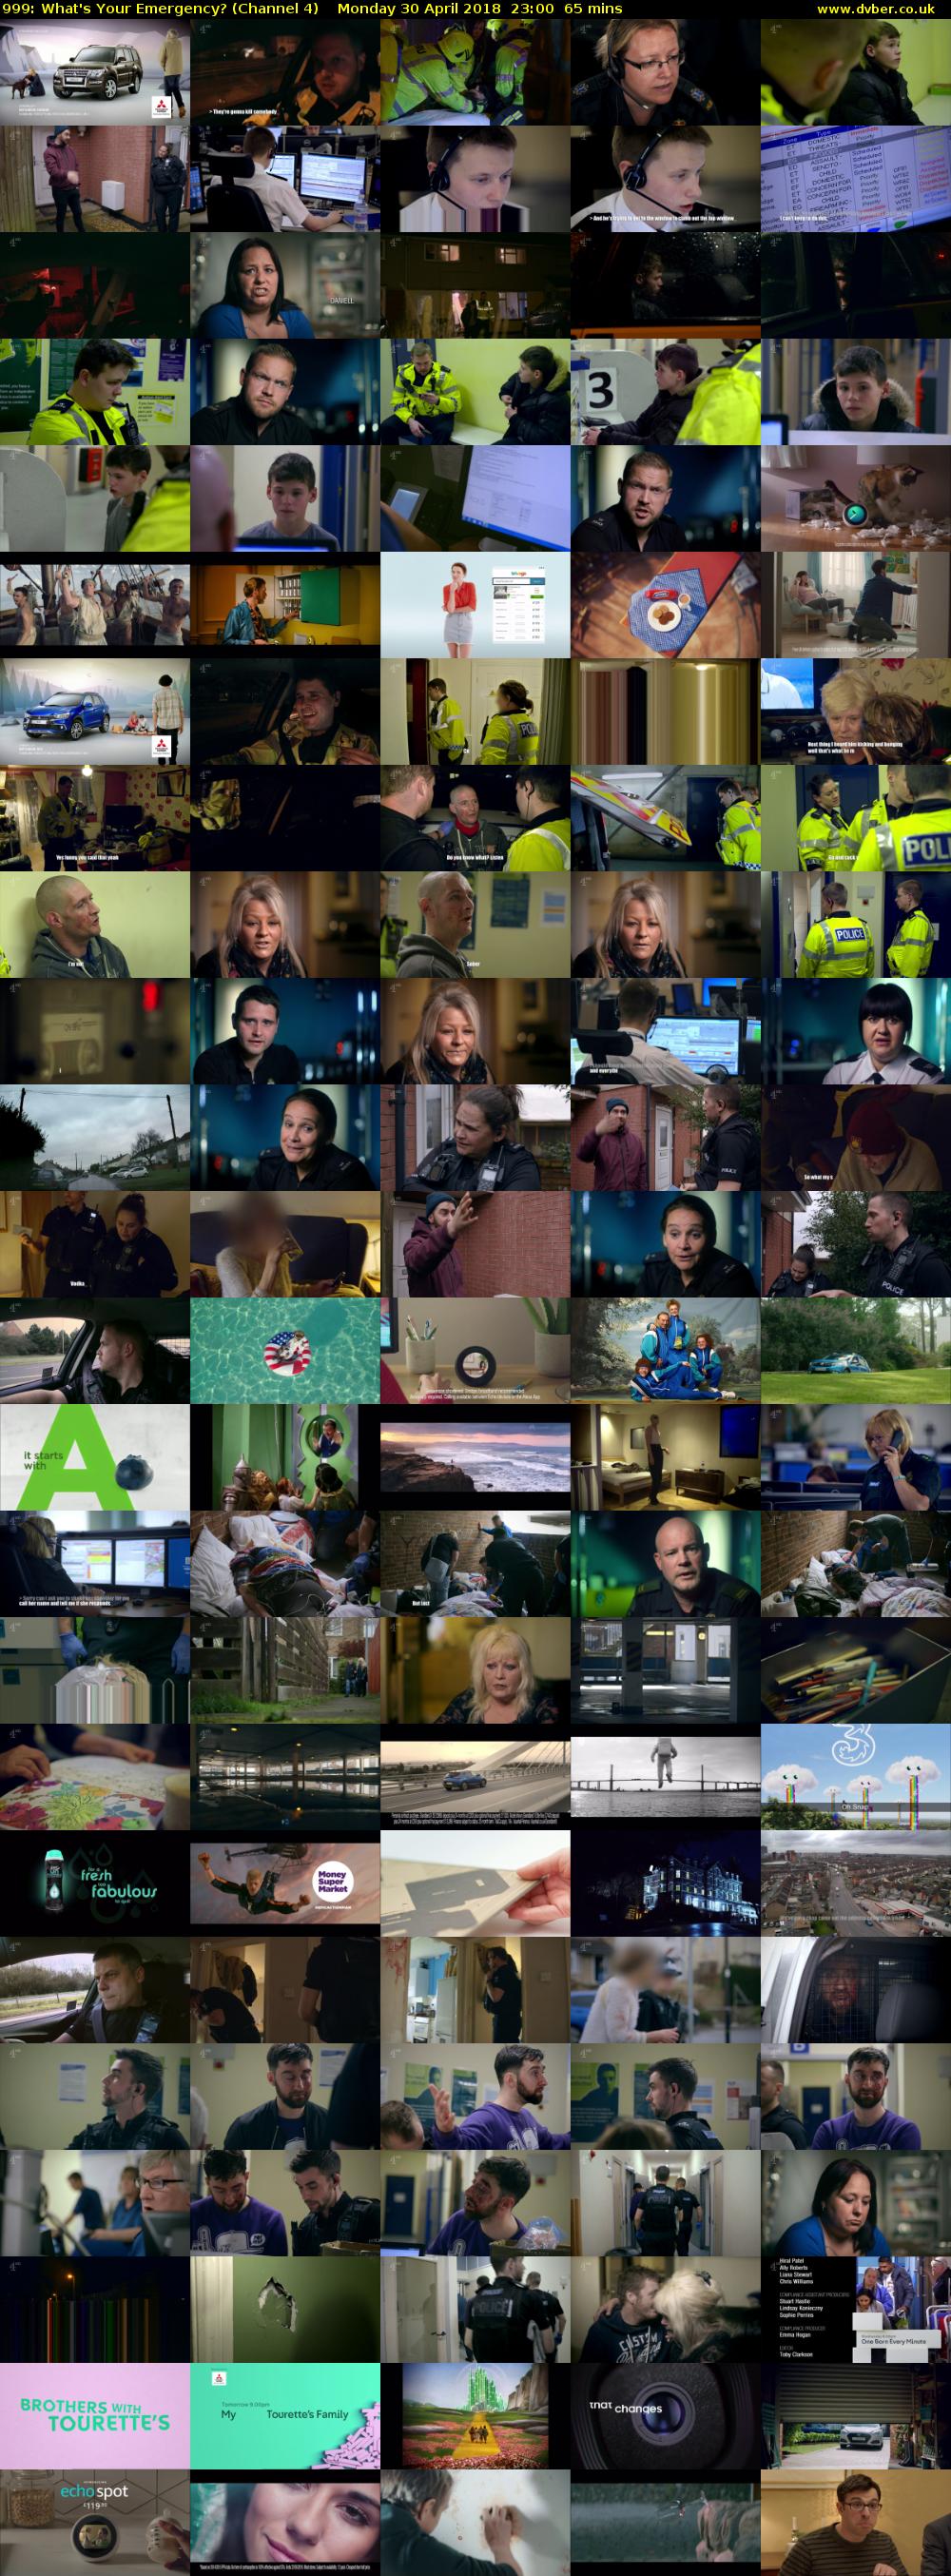 999: What's Your Emergency? (Channel 4) Monday 30 April 2018 23:00 - 00:05